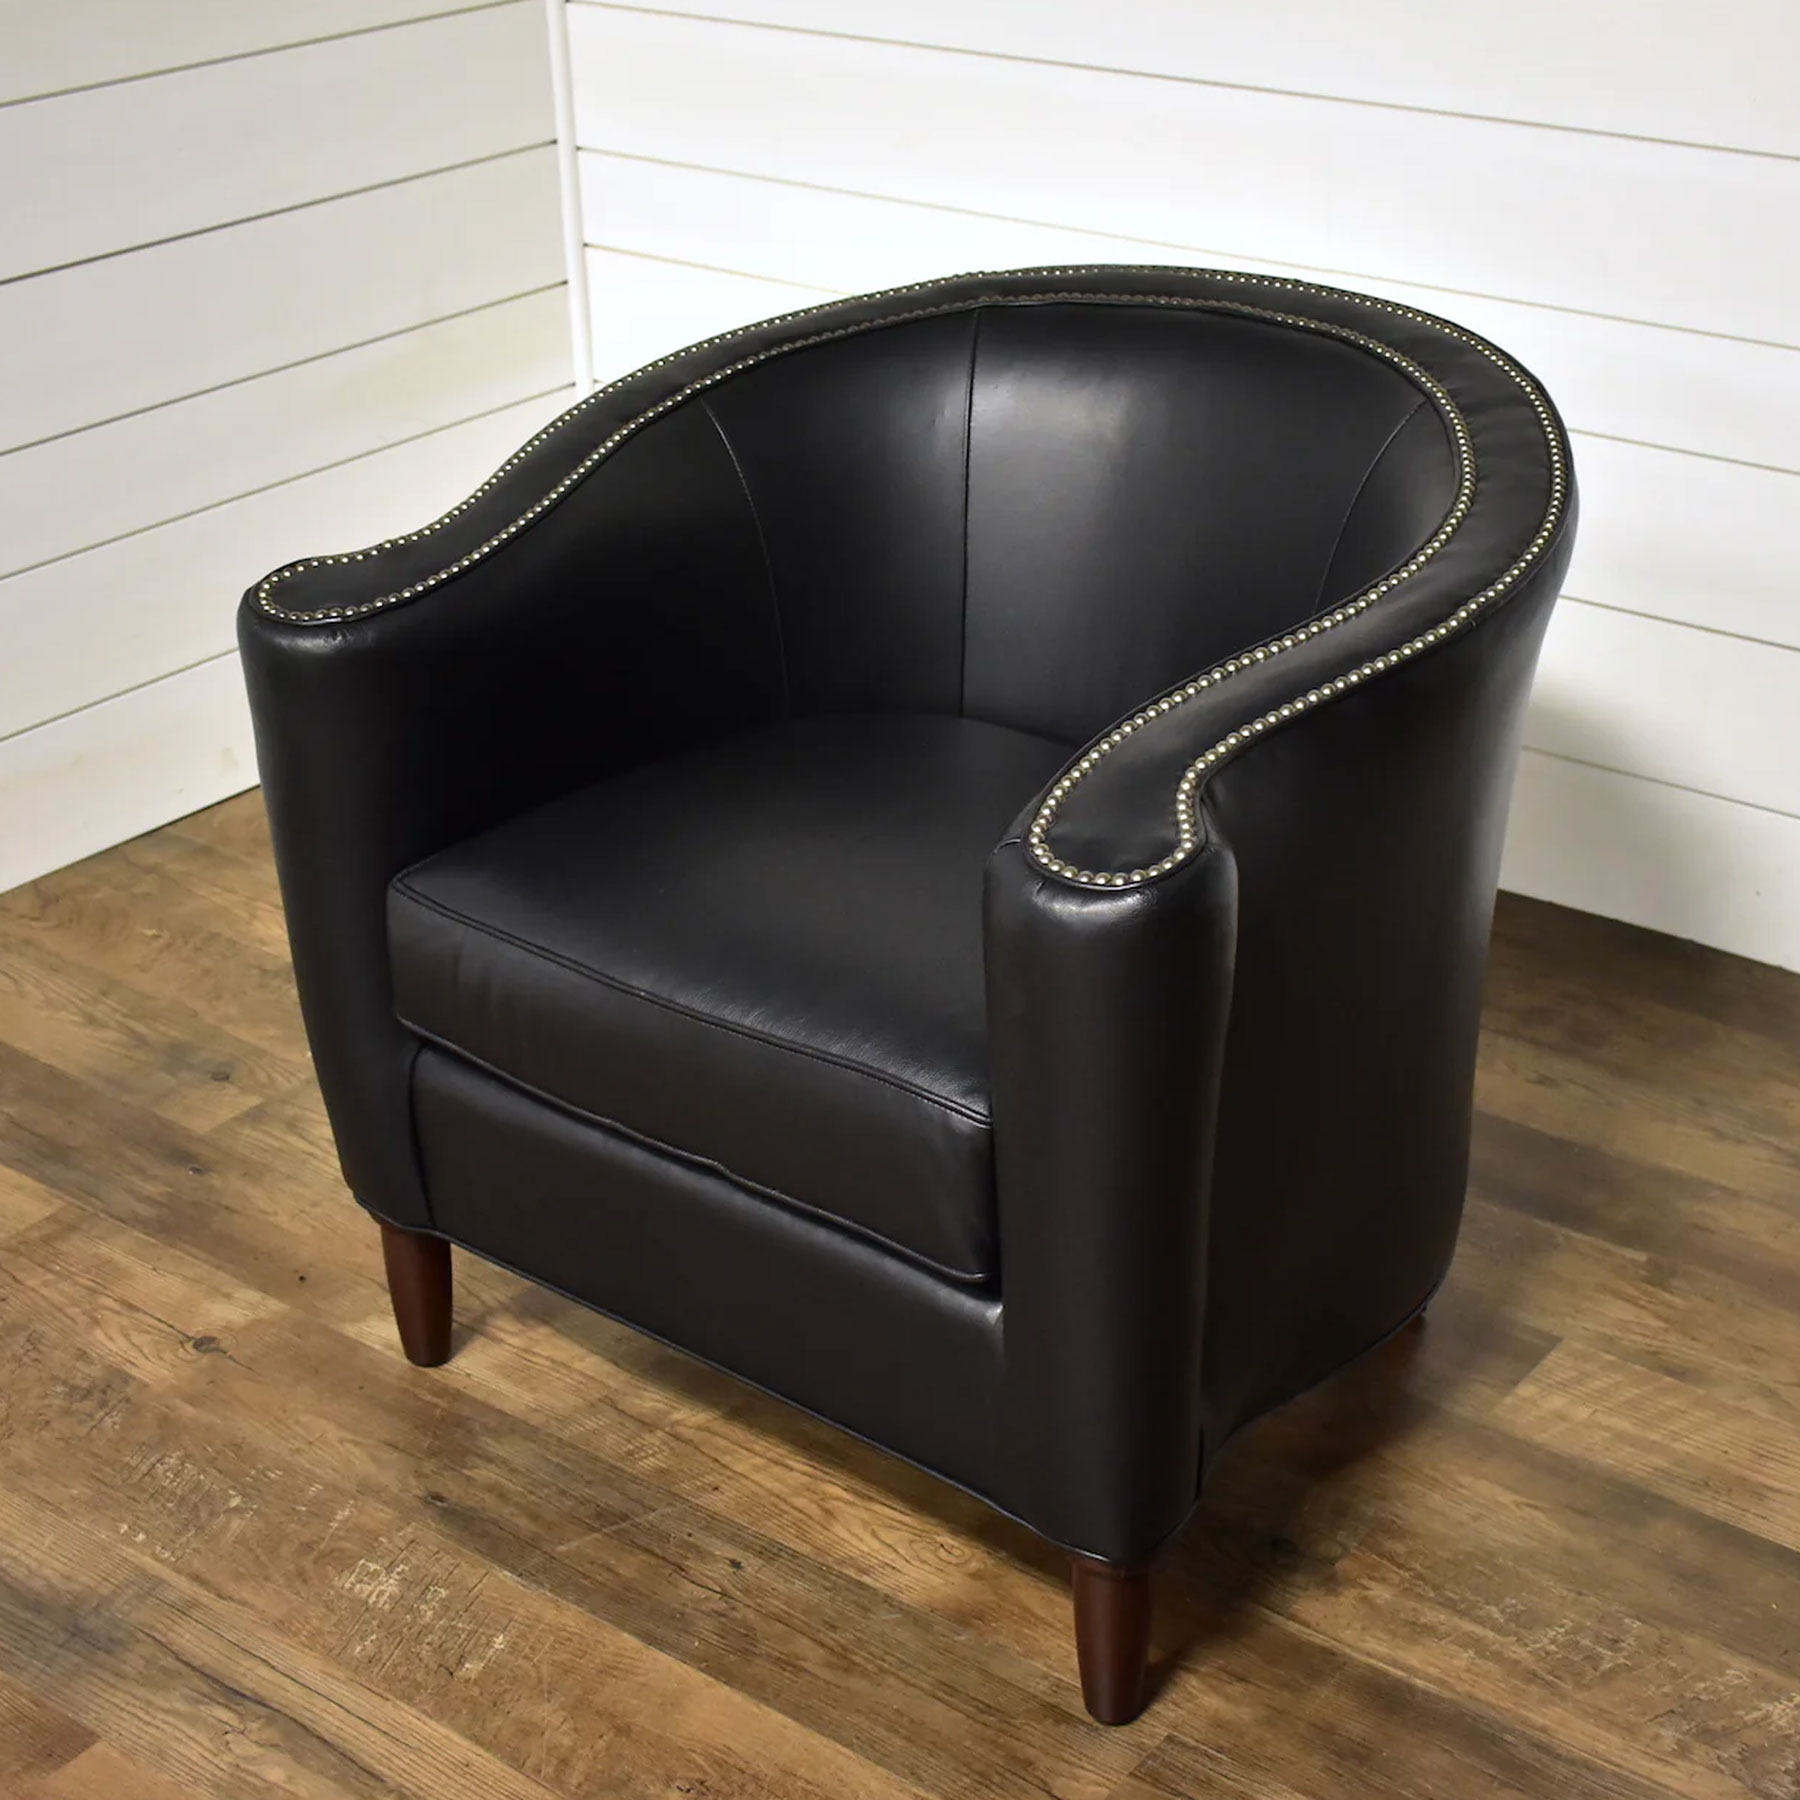 McKinley Leather 233 Delaney Barrel Chair in Mohican Panther Leather